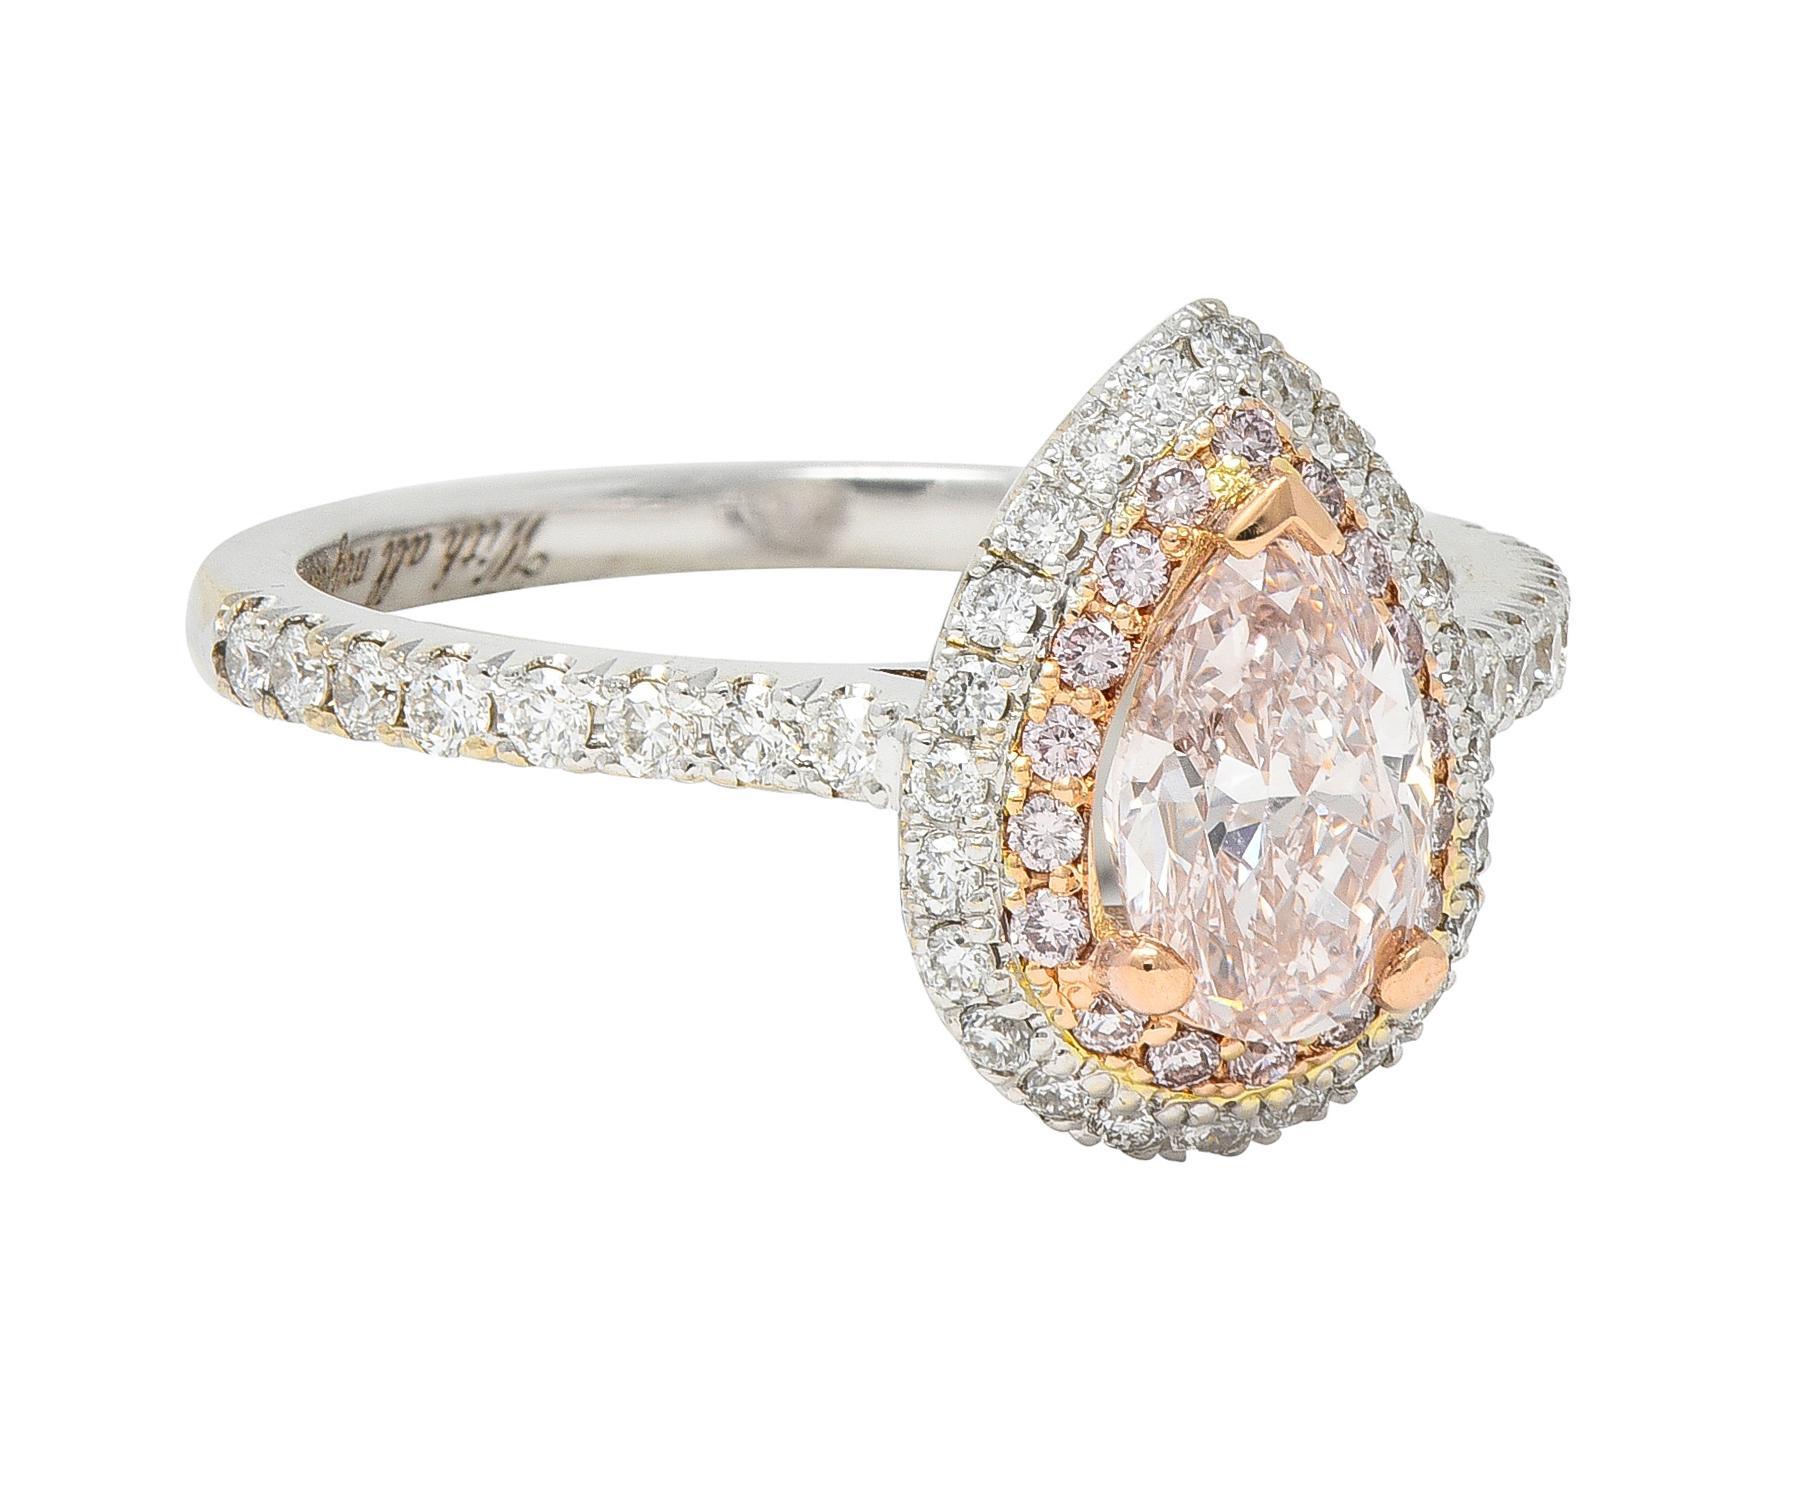 Centering a pear cut diamond weighing 0.81 carat prong set in yellow gold
Natural Fancy Light Brownish Pink in color with VS2 clarity
With a halo surround of round brilliant cut diamonds 
Fancy pink in color and well matched to center - bead set in